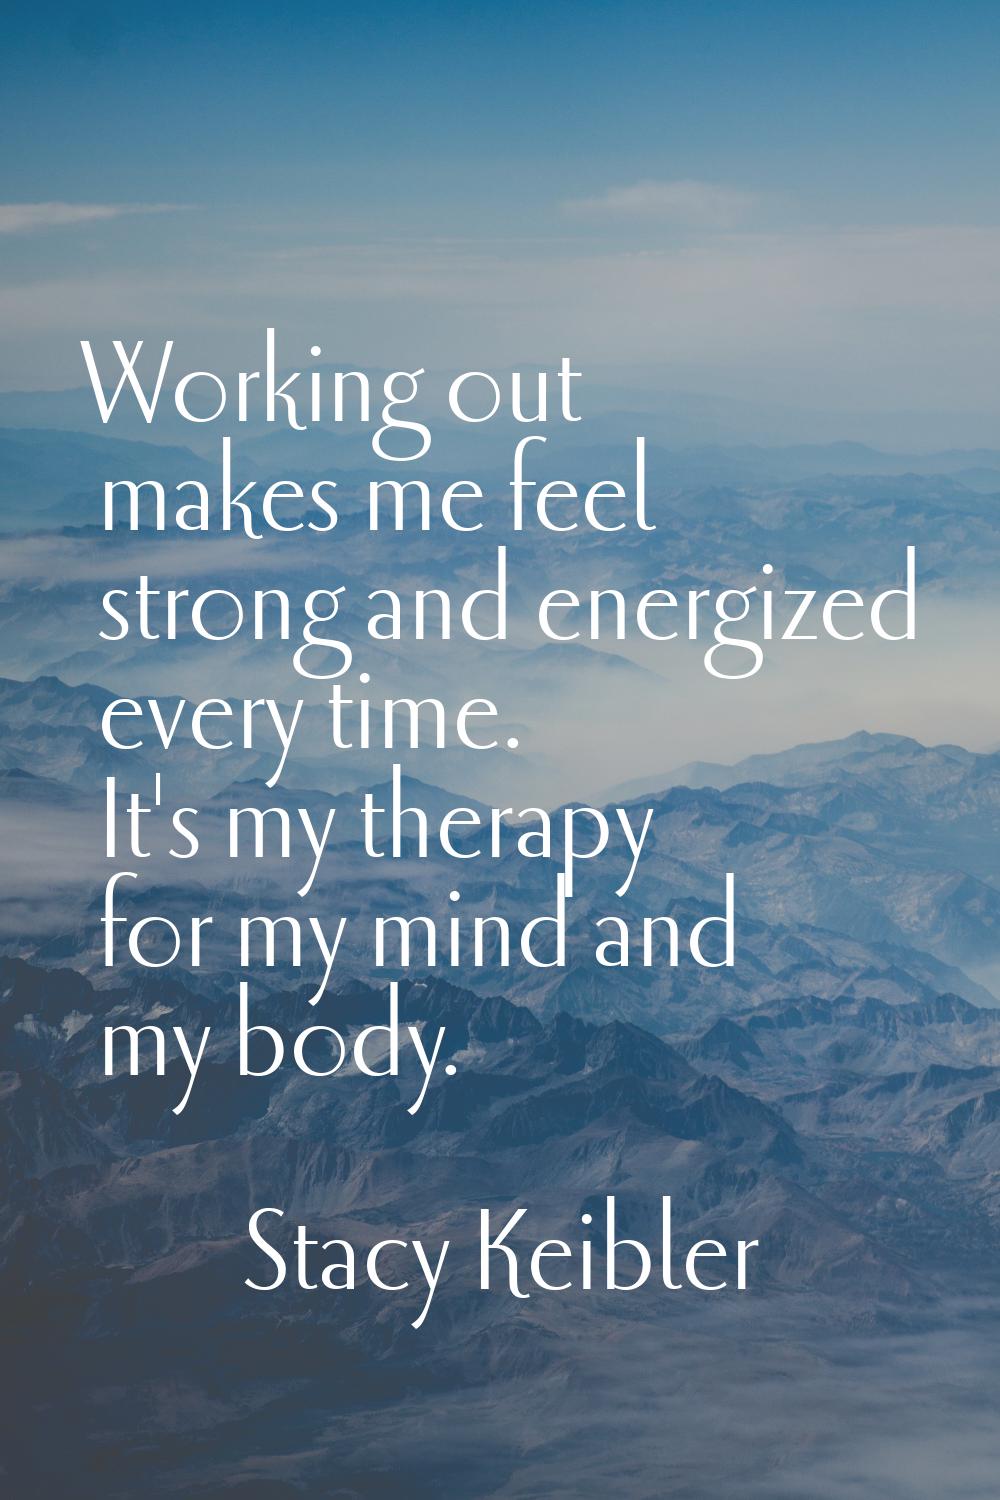 Working out makes me feel strong and energized every time. It's my therapy for my mind and my body.